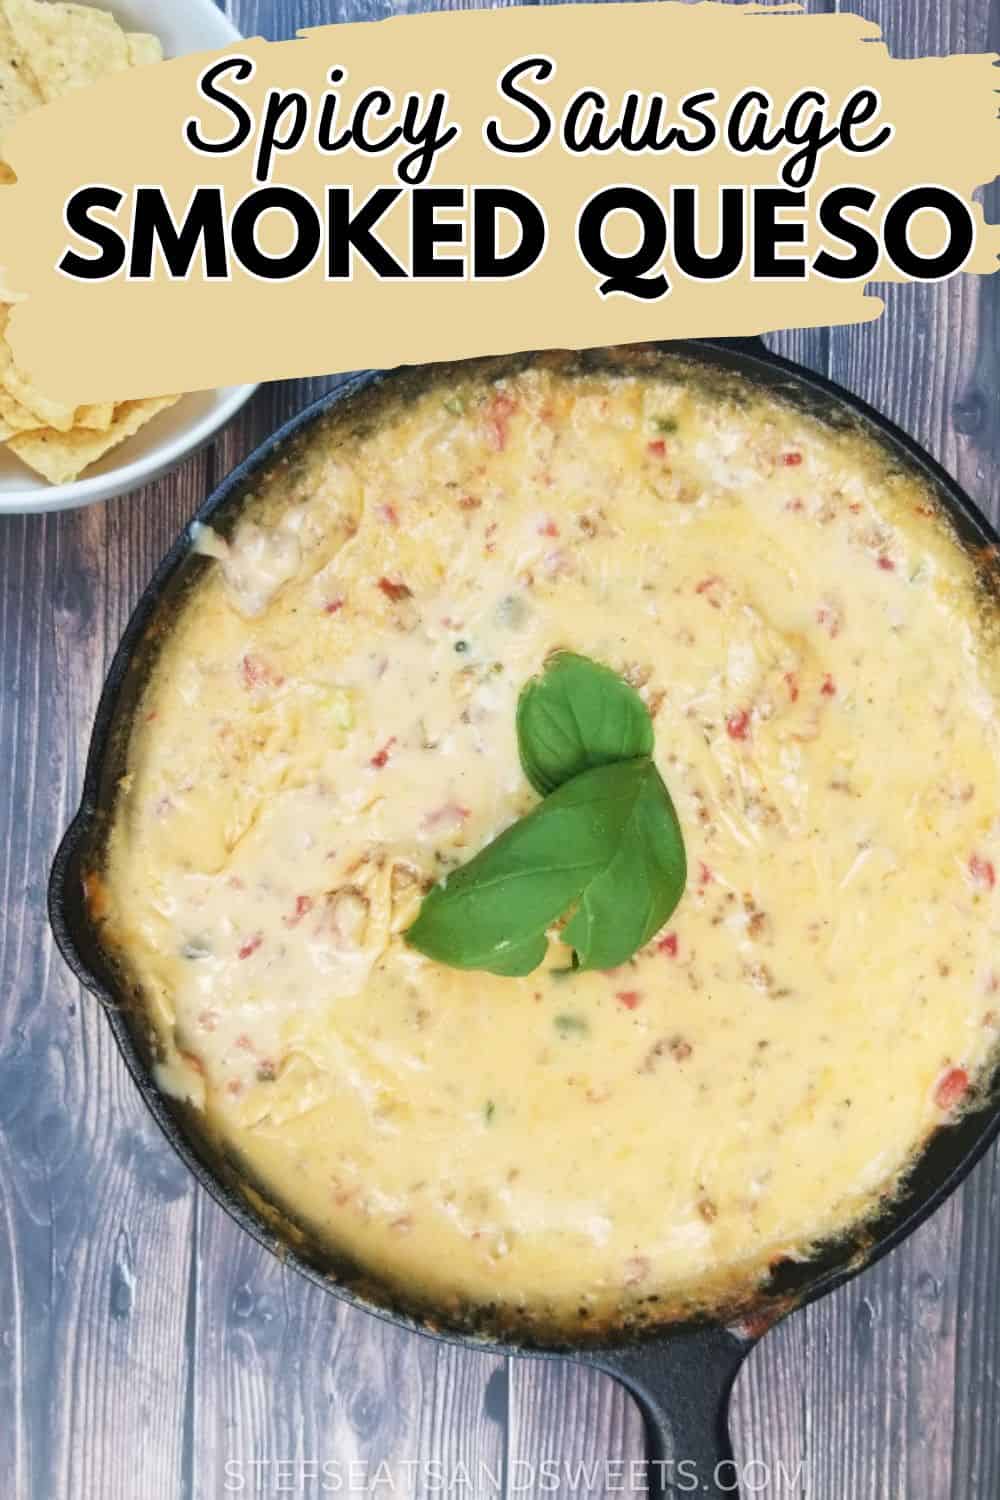 Smoked queso in cast irons killet 